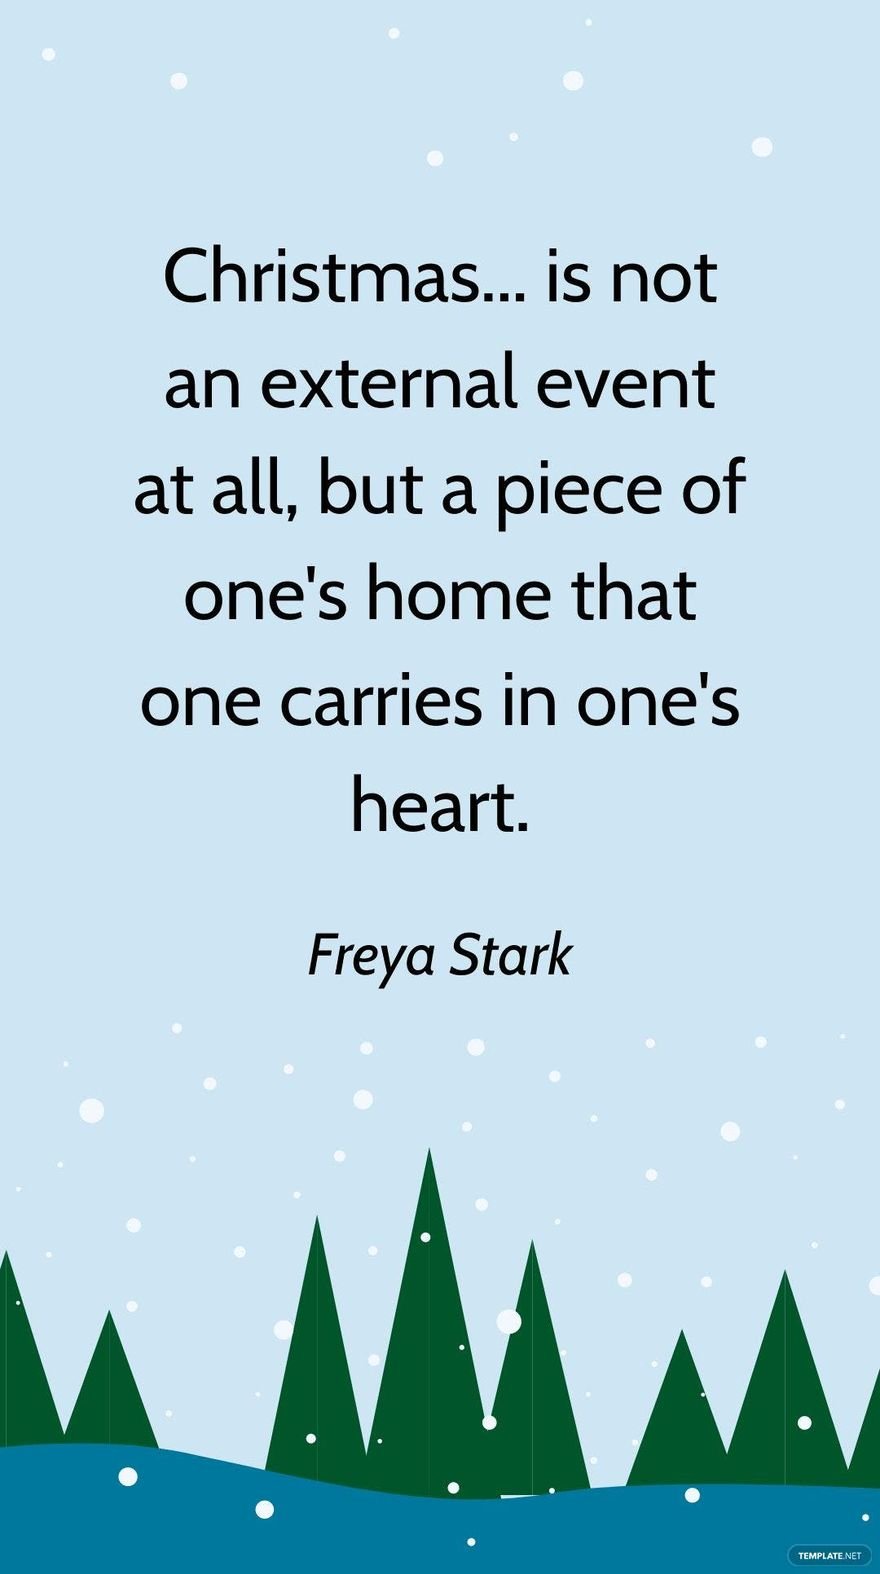 Free Freya Stark - Christmas... is not an external event at all, but a piece of one's home that one carries in one's heart. in JPG